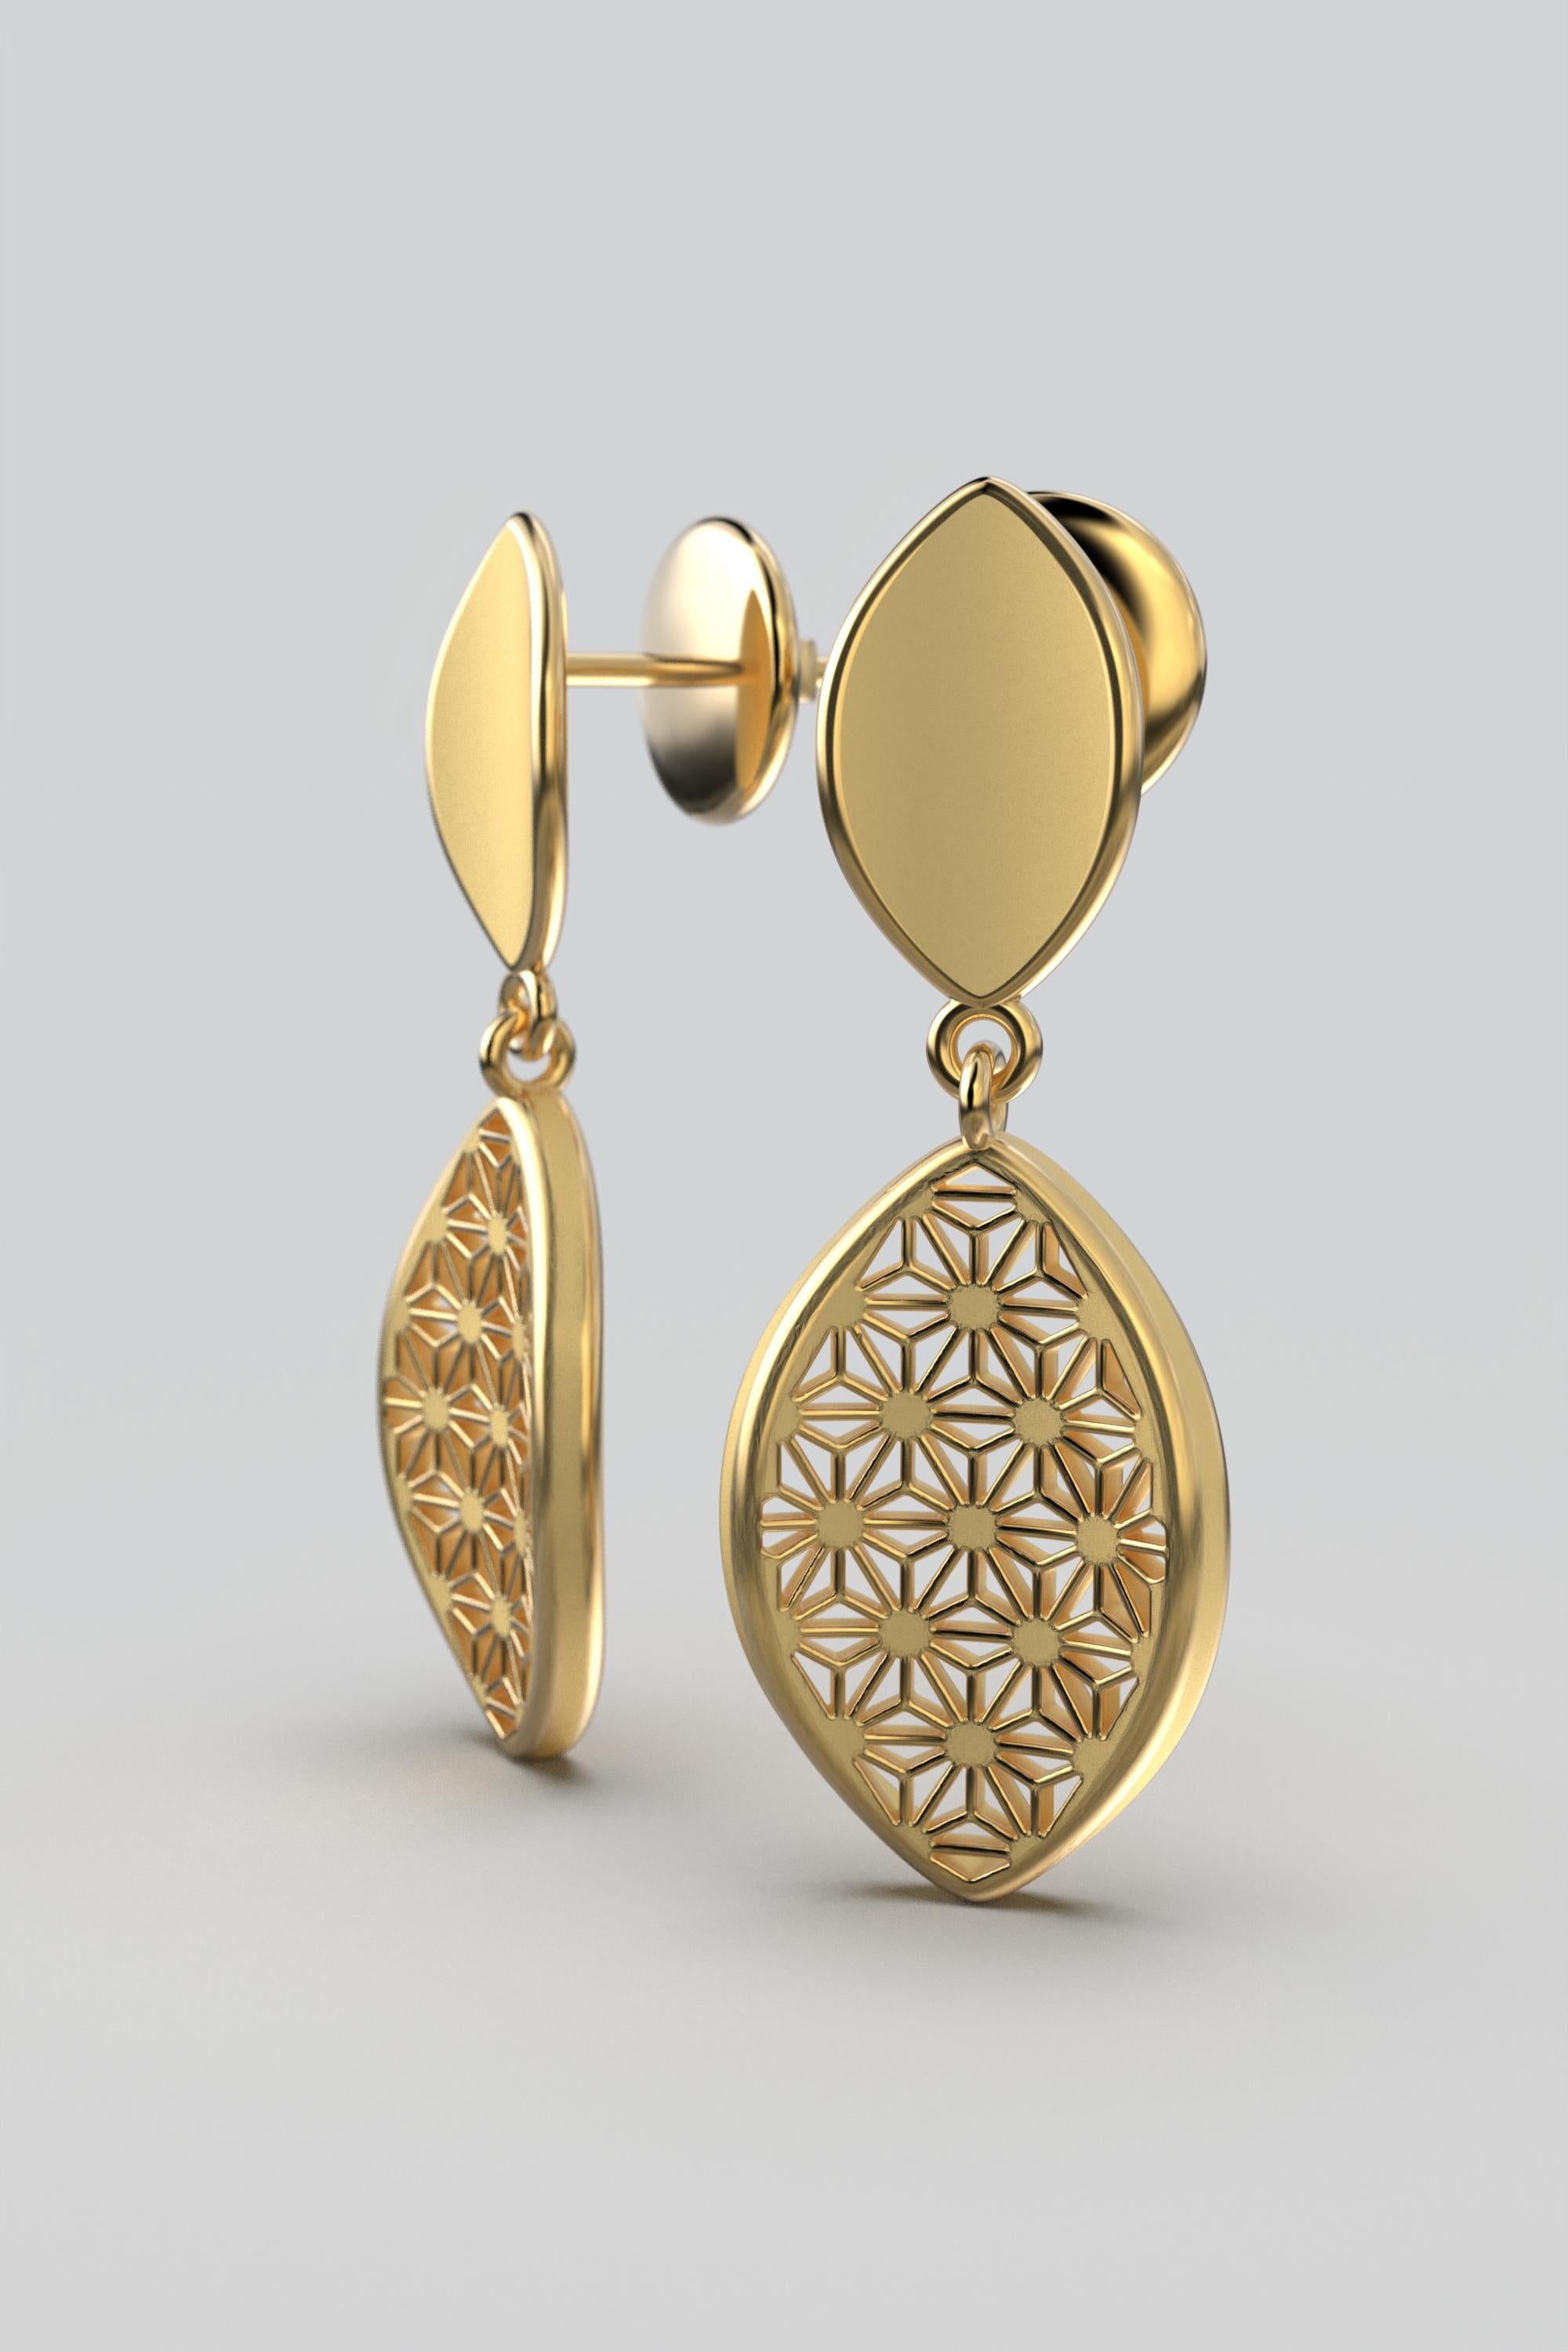 Modern Japanese Sashiko Pattern Earrings Made in Italy in 14k Gold  Oltremare Gioielli For Sale